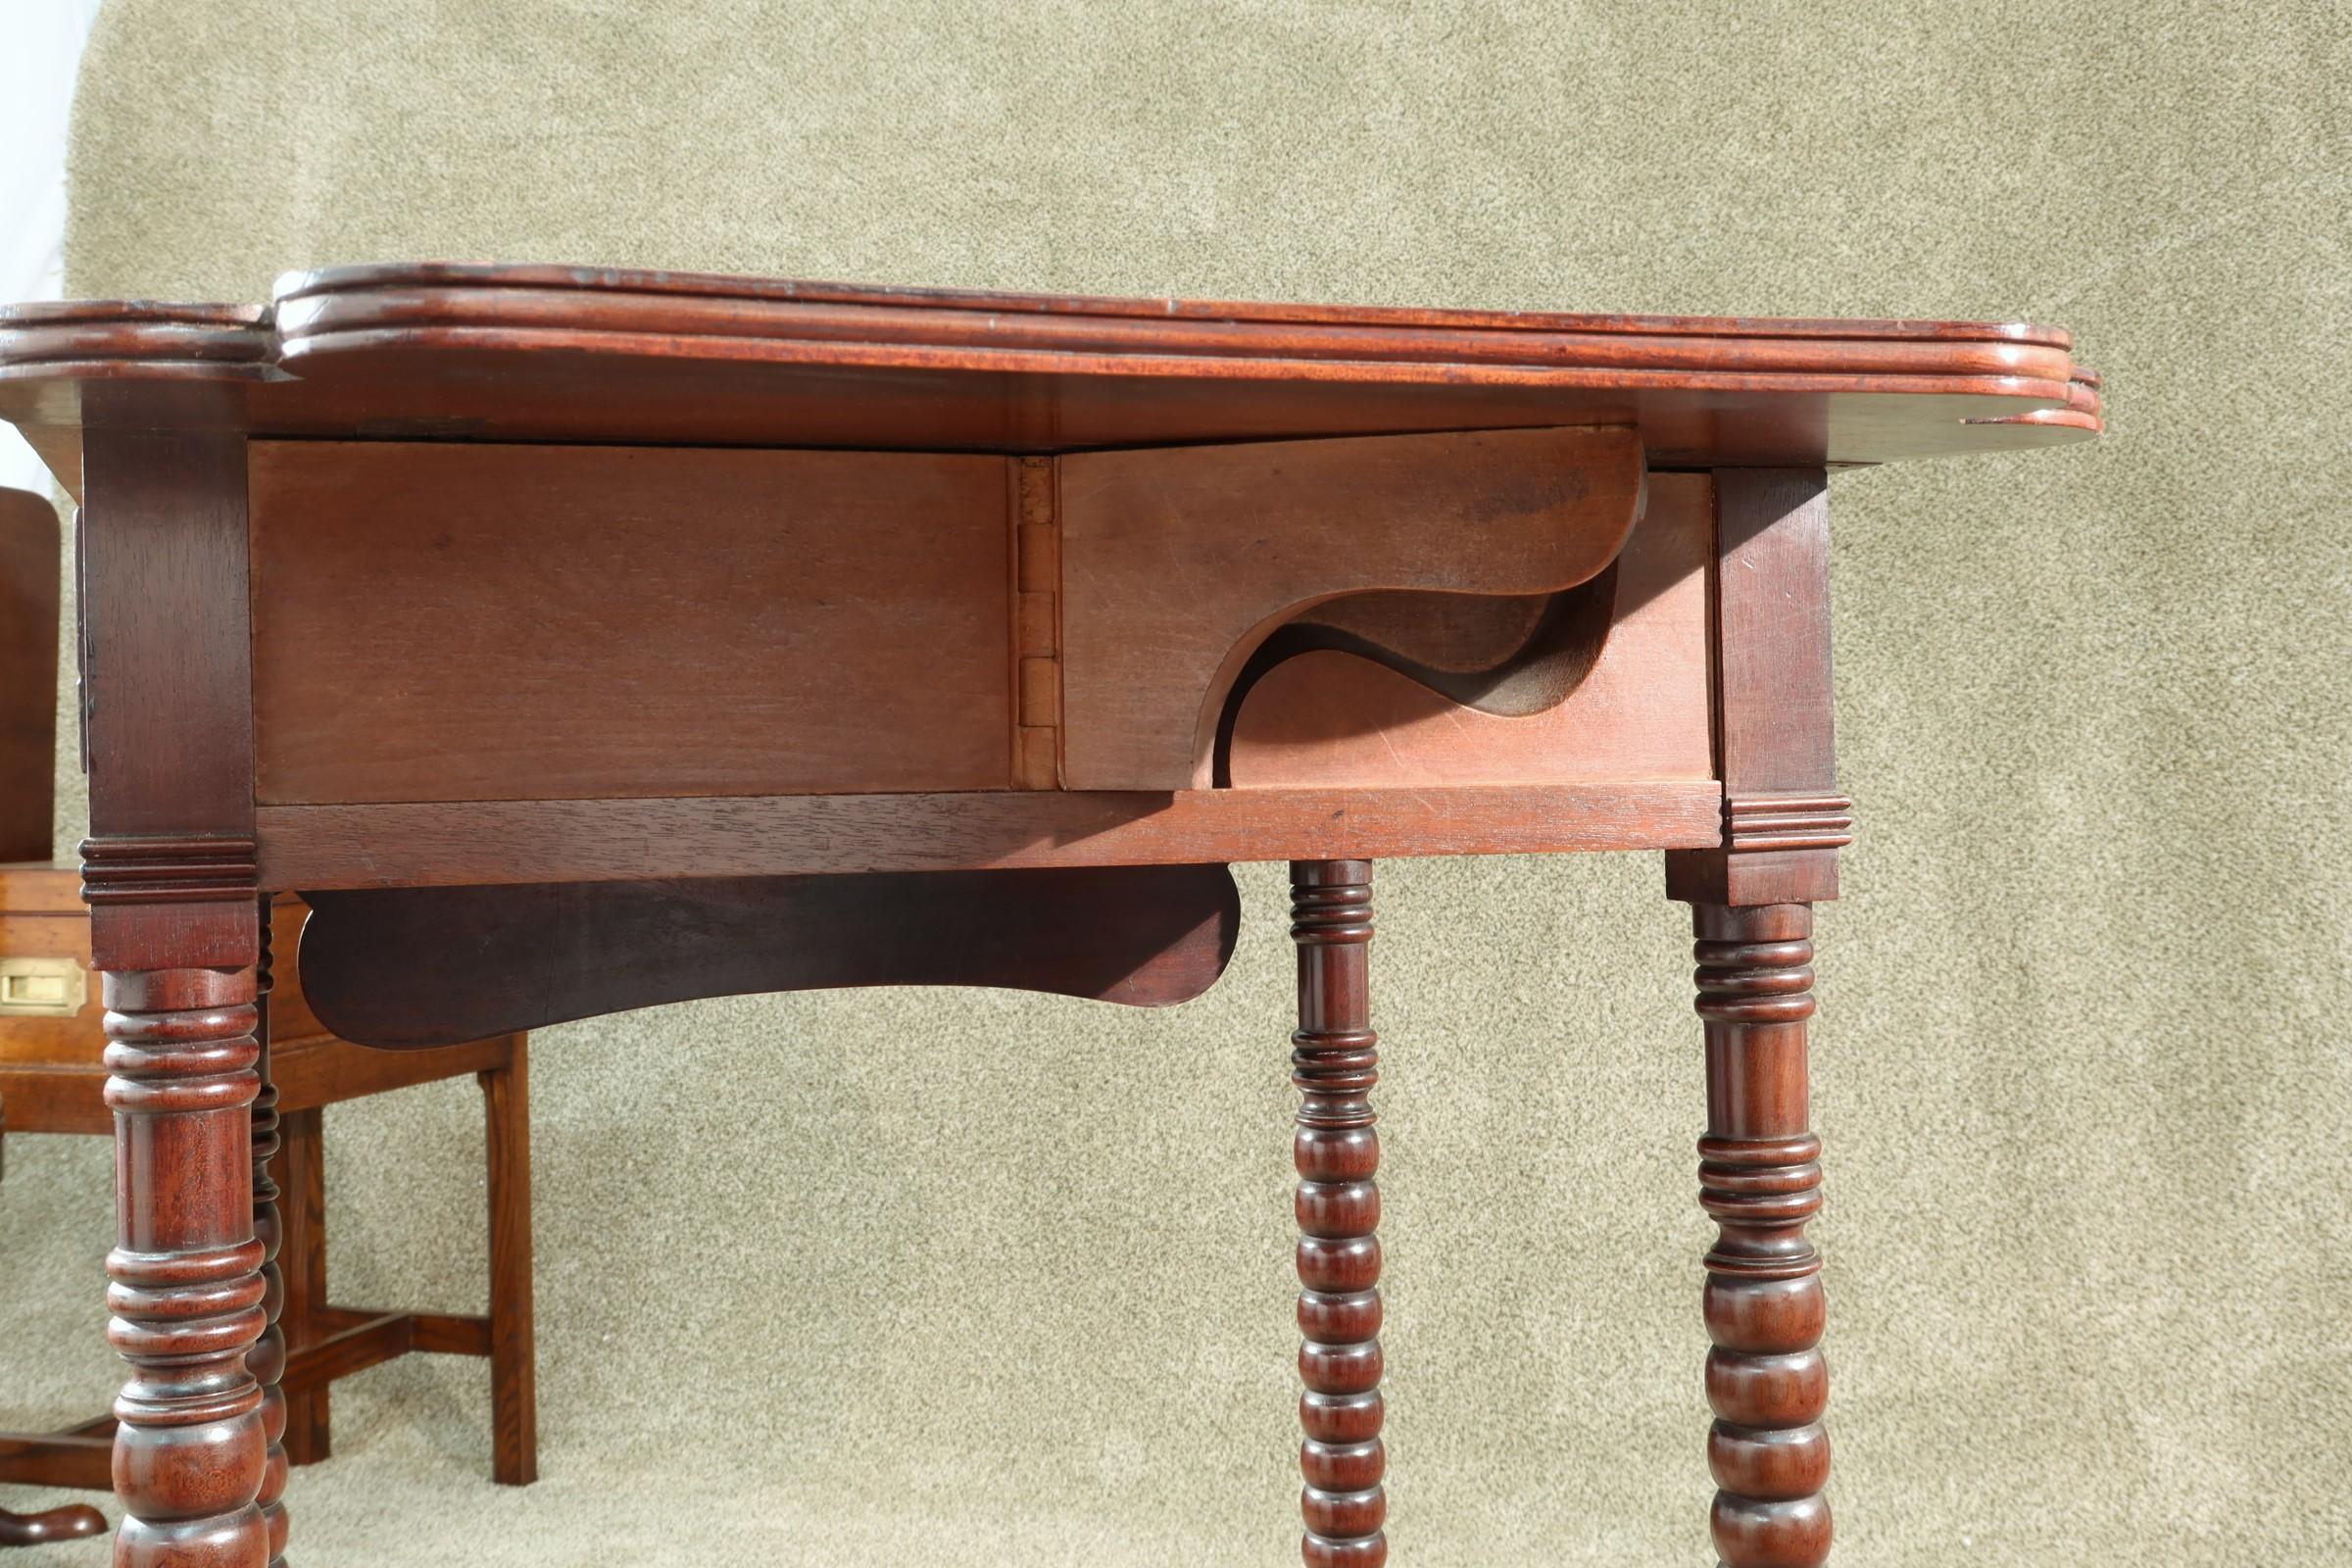 English Regency Period Small Mahogany Drop Leaf Table, circa 1820 In Good Condition For Sale In Barrington, IL